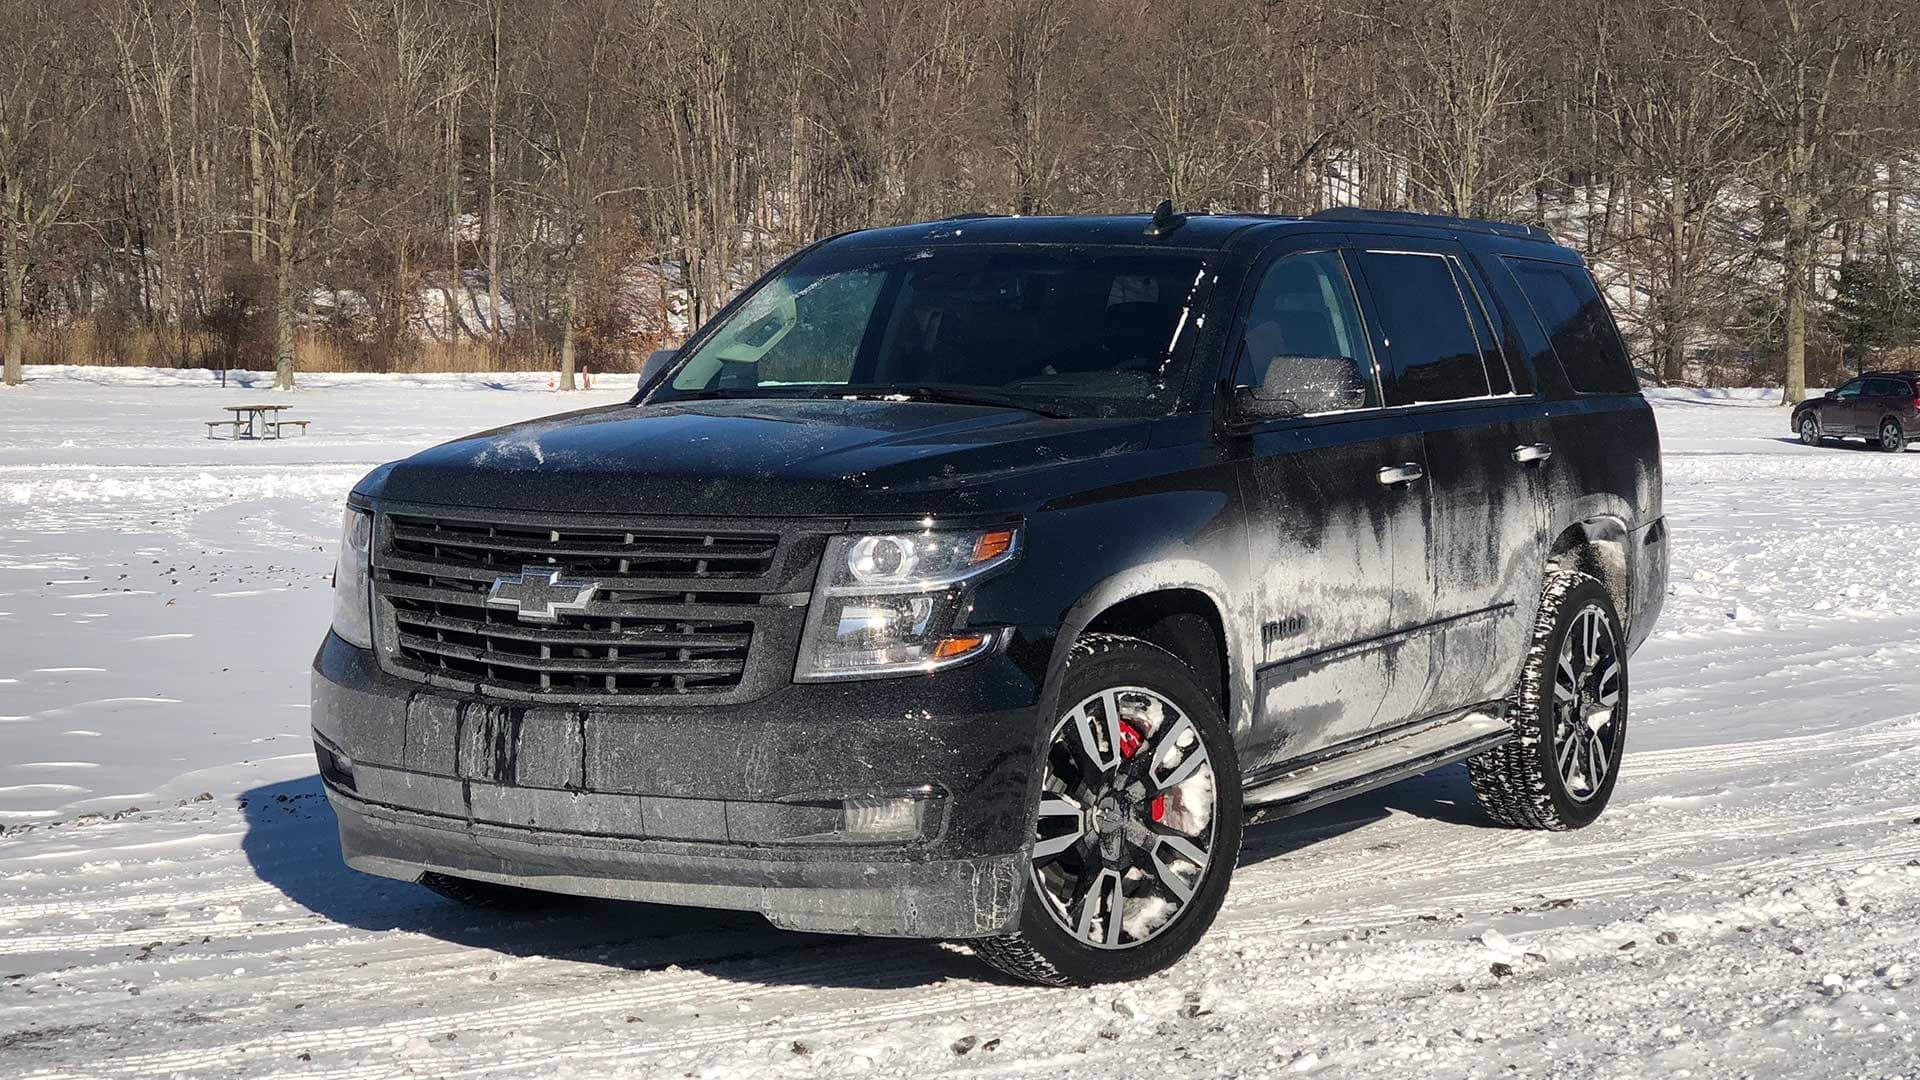 2018 Chevrolet Tahoe RST Premier Review: The Best Tahoe, at the Worst Price